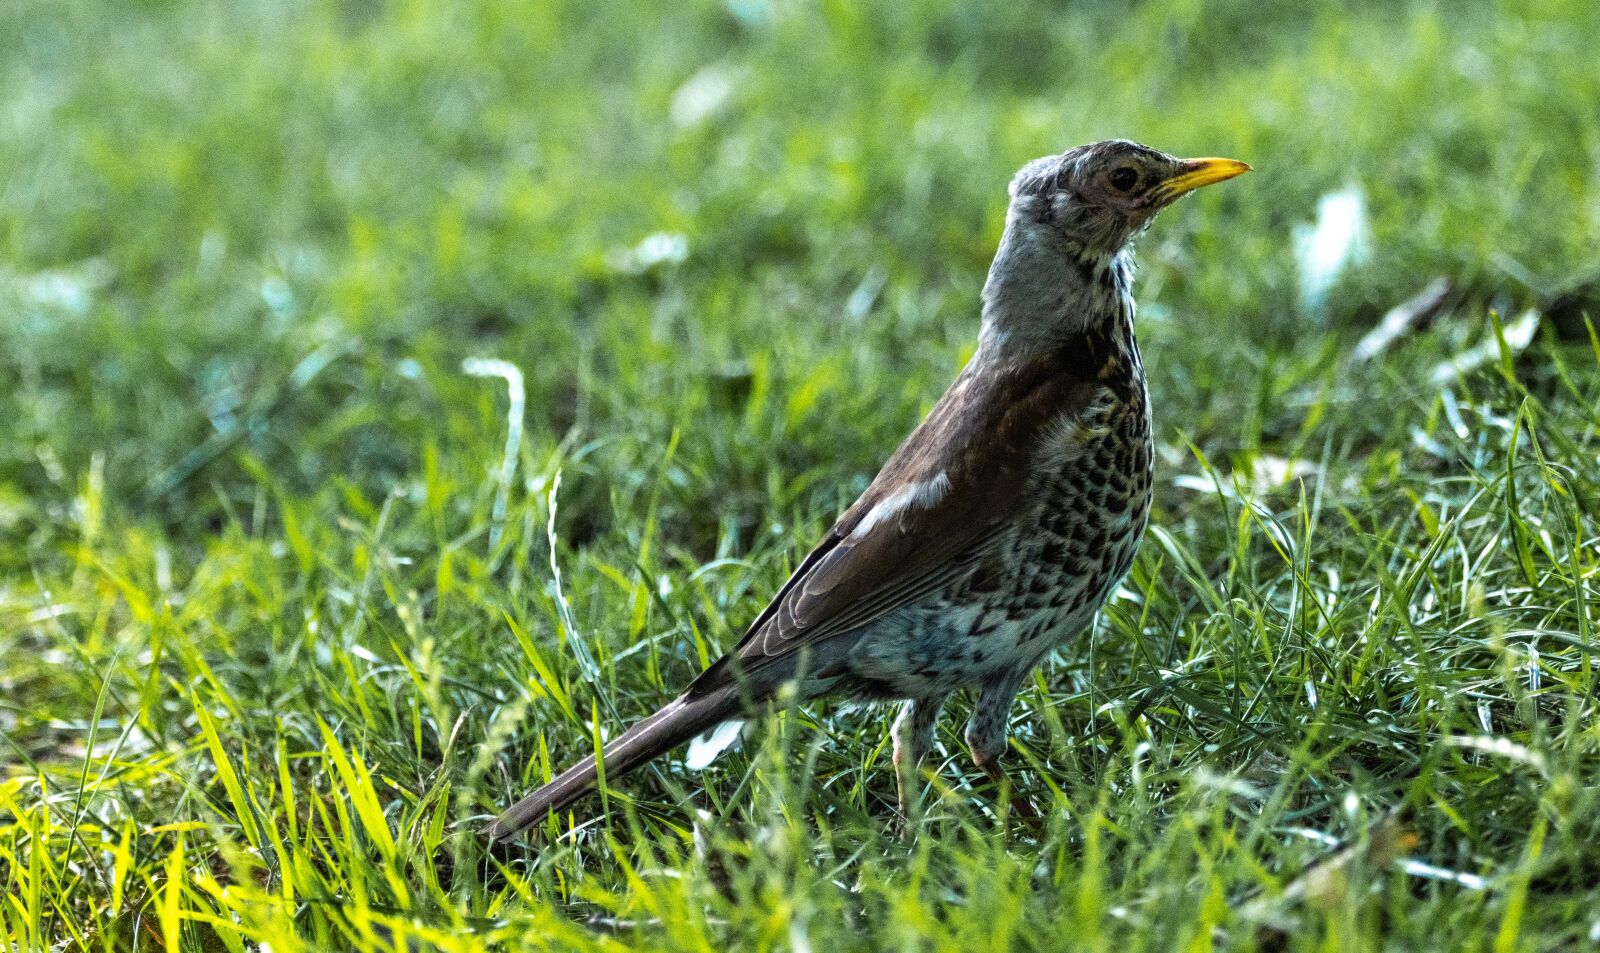 150-600mm F5-6.3 DG OS HSM | Contemporary 015 sample photo. Song thrush, grass, nature photography